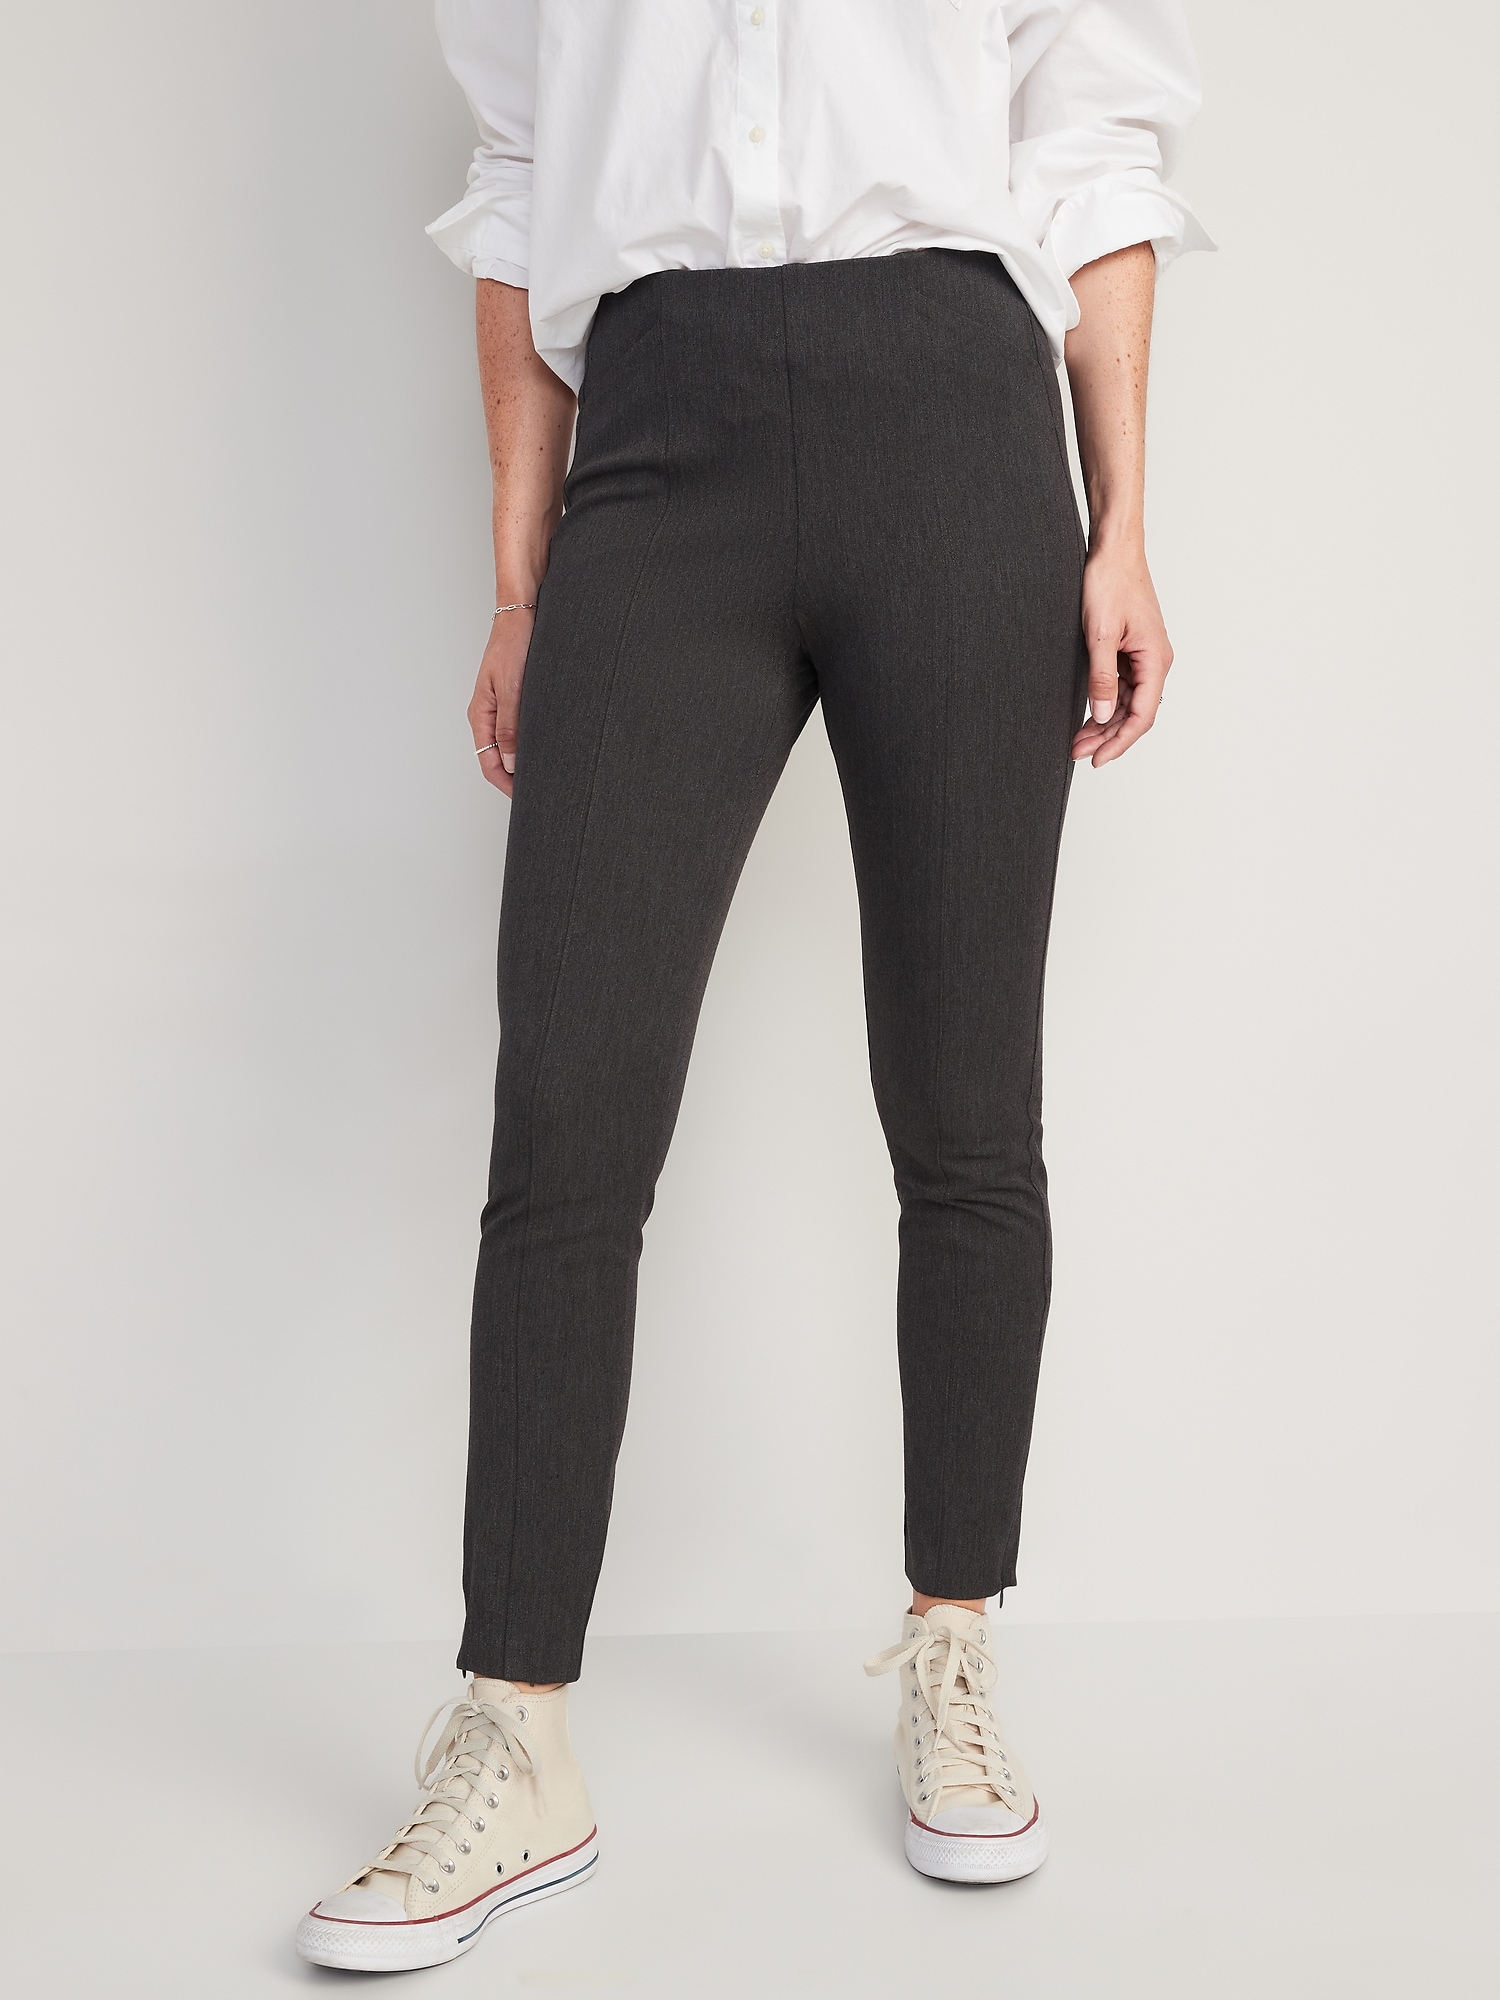 High-Waisted Pull-On Pixie Skinny Ankle Pants Hot Deal